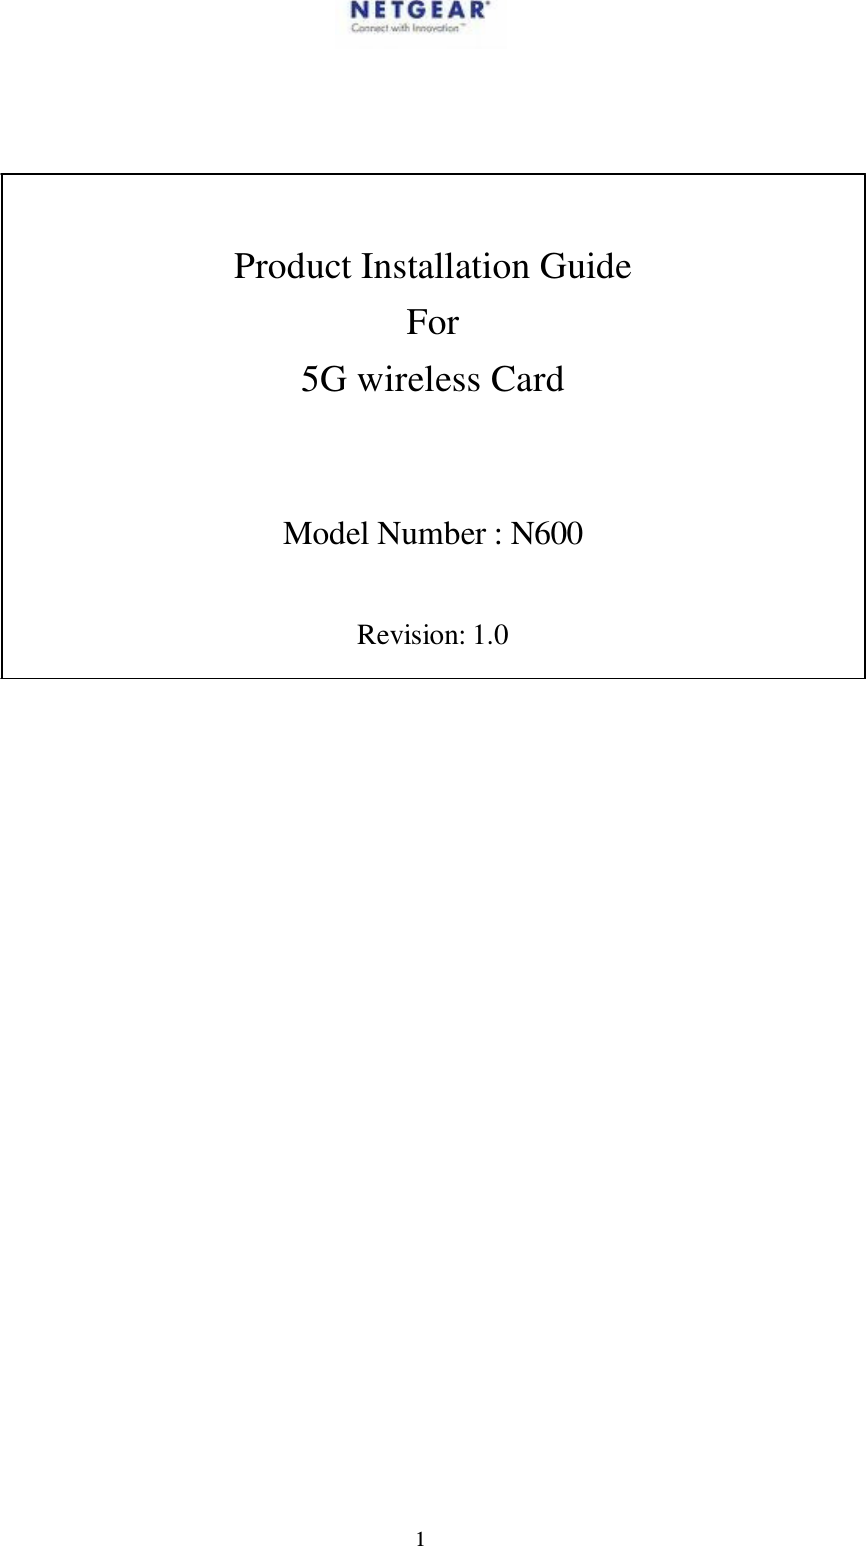 1Product Installation Guide For 5G wireless Card Model Number : N600 Revision: 1.0 